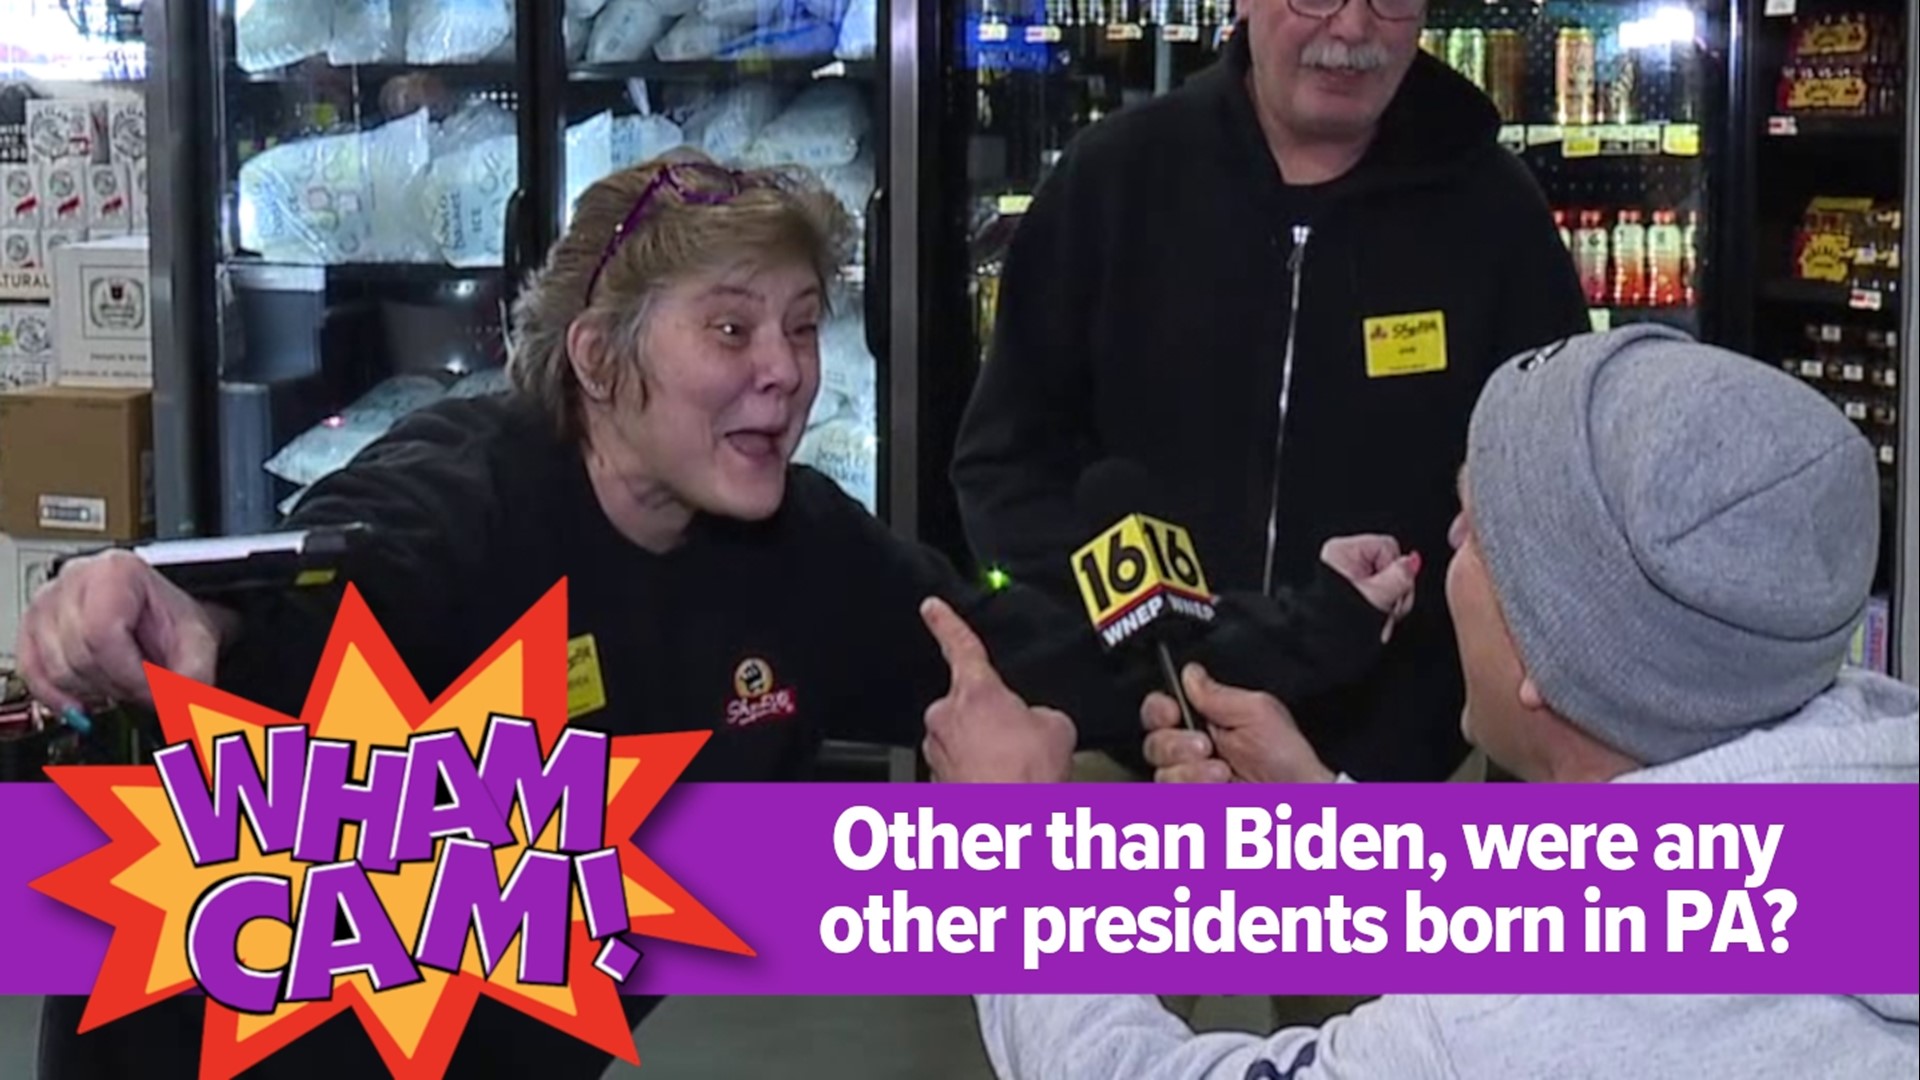 We already know that President Joe Biden was born in Scranton, but were there any other presidents from PA? As always, Joe has the answer in this Wham Cam.